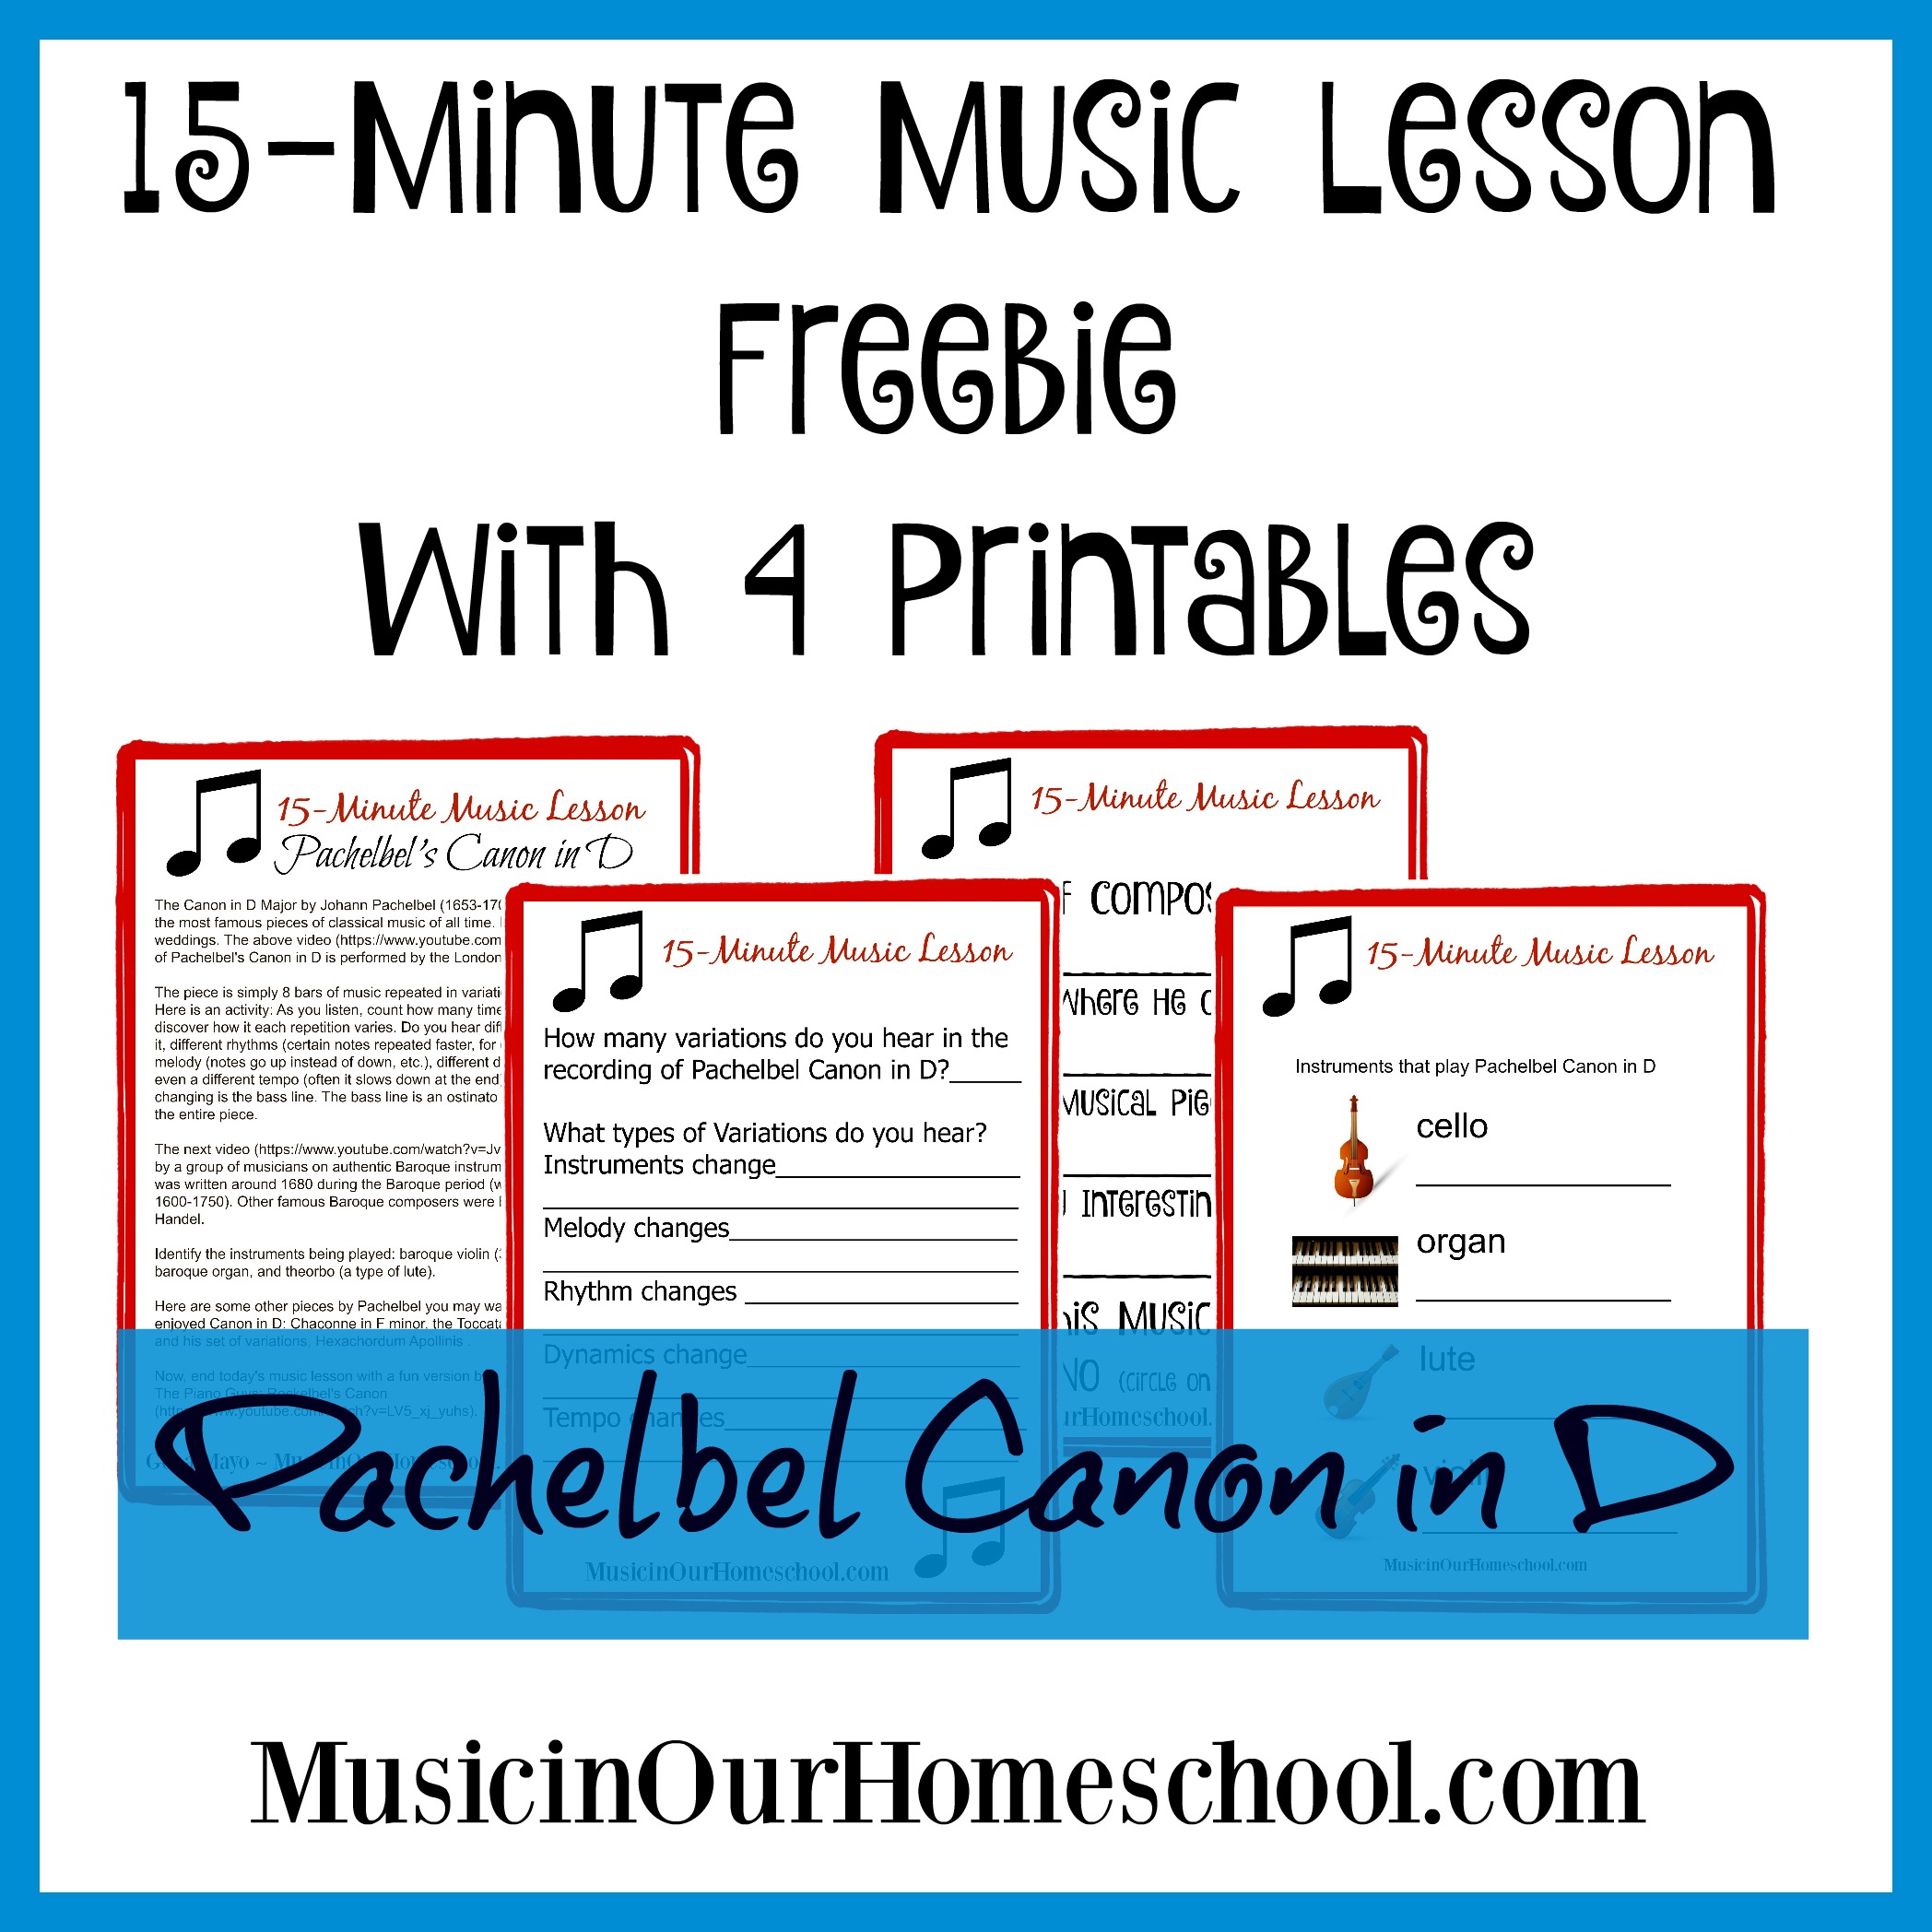 Free 15-Minute Music Lesson on Pachelbel's Canon, with Printables